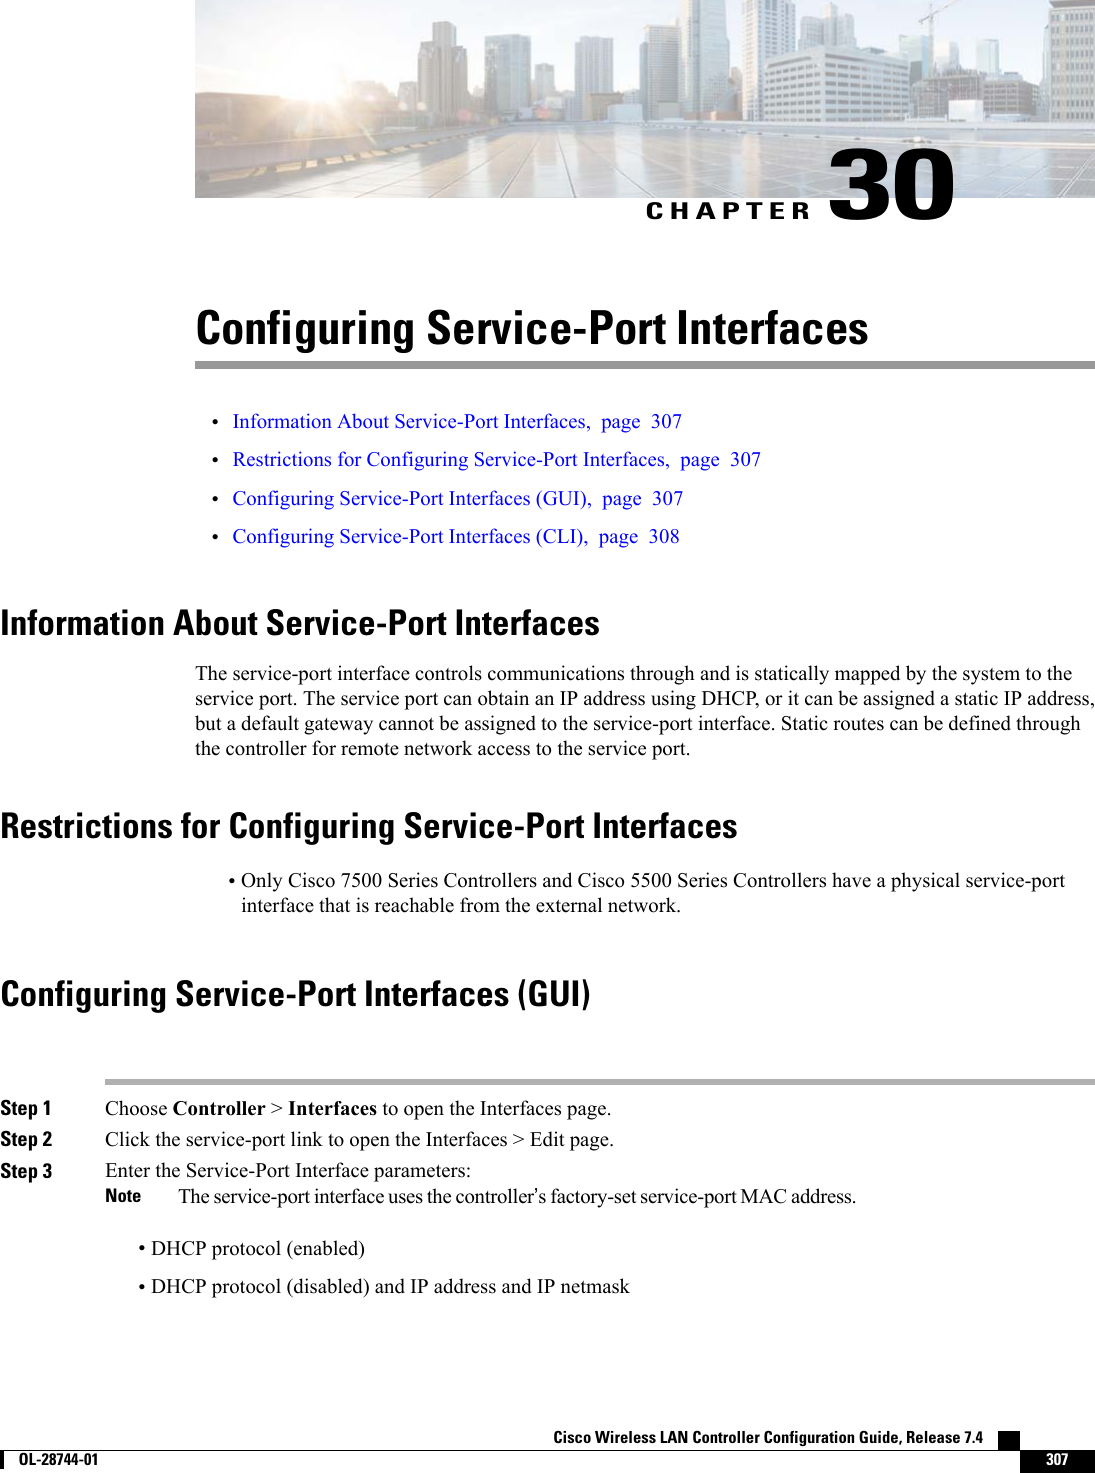 CHAPTER 30Configuring Service-Port Interfaces•Information About Service-Port Interfaces, page 307•Restrictions for Configuring Service-Port Interfaces, page 307•Configuring Service-Port Interfaces (GUI), page 307•Configuring Service-Port Interfaces (CLI), page 308Information About Service-Port InterfacesThe service-port interface controls communications through and is statically mapped by the system to theservice port. The service port can obtain an IP address using DHCP, or it can be assigned a static IP address,but a default gateway cannot be assigned to the service-port interface. Static routes can be defined throughthe controller for remote network access to the service port.Restrictions for Configuring Service-Port Interfaces•Only Cisco 7500 Series Controllers and Cisco 5500 Series Controllers have a physical service-portinterface that is reachable from the external network.Configuring Service-Port Interfaces (GUI)Step 1 Choose Controller &gt;Interfaces to open the Interfaces page.Step 2 Click the service-port link to open the Interfaces &gt; Edit page.Step 3 Enter the Service-Port Interface parameters:The service-port interface uses the controller’s factory-set service-port MAC address.Note•DHCP protocol (enabled)•DHCP protocol (disabled) and IP address and IP netmaskCisco Wireless LAN Controller Configuration Guide, Release 7.4        OL-28744-01 307